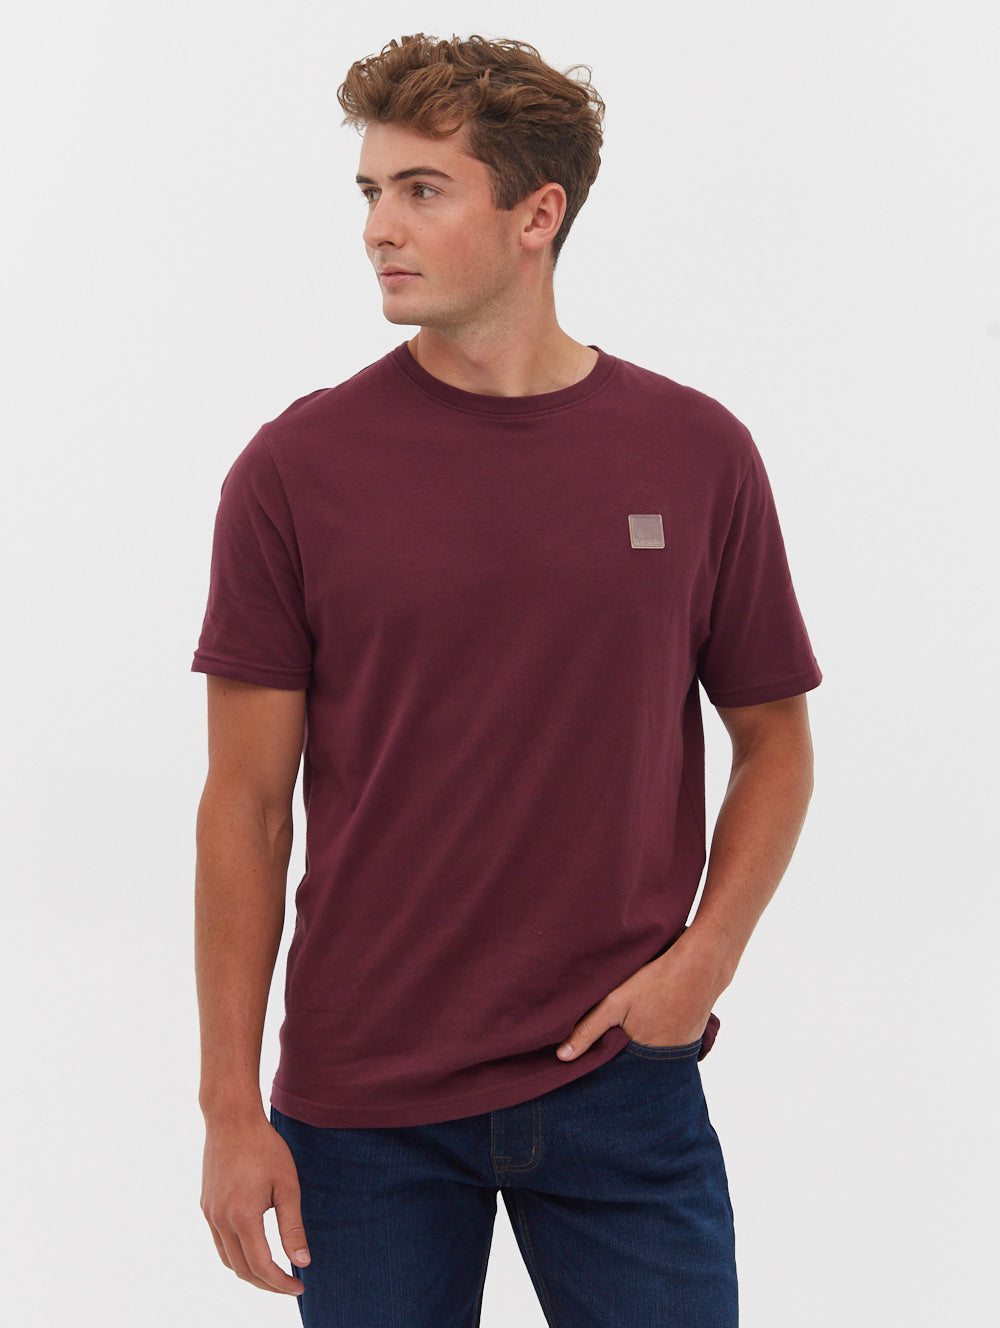 Clinto Square Patch Tee - BN2A126408